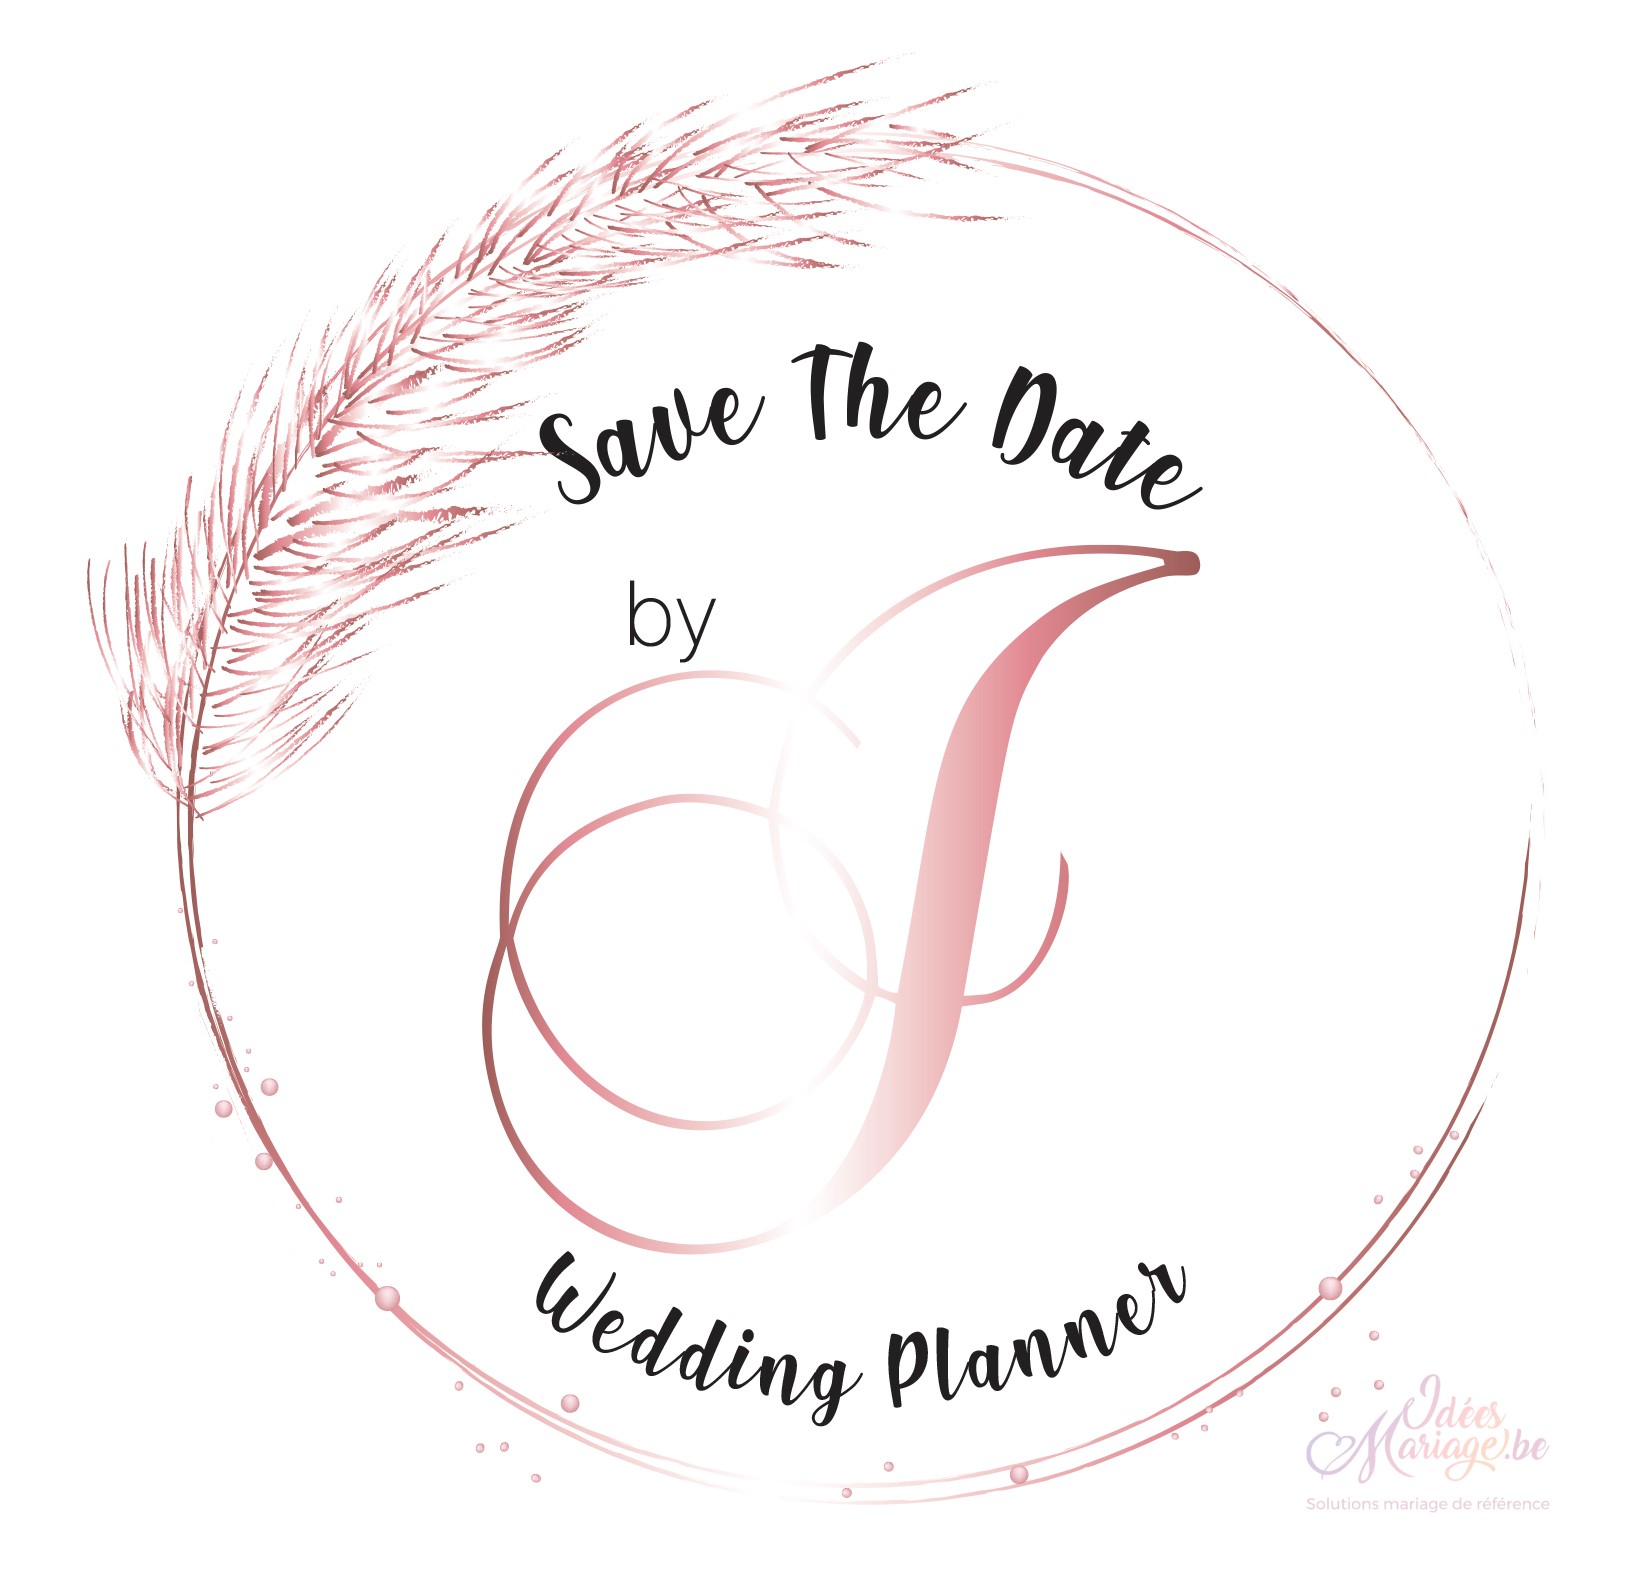 Save The Date by J